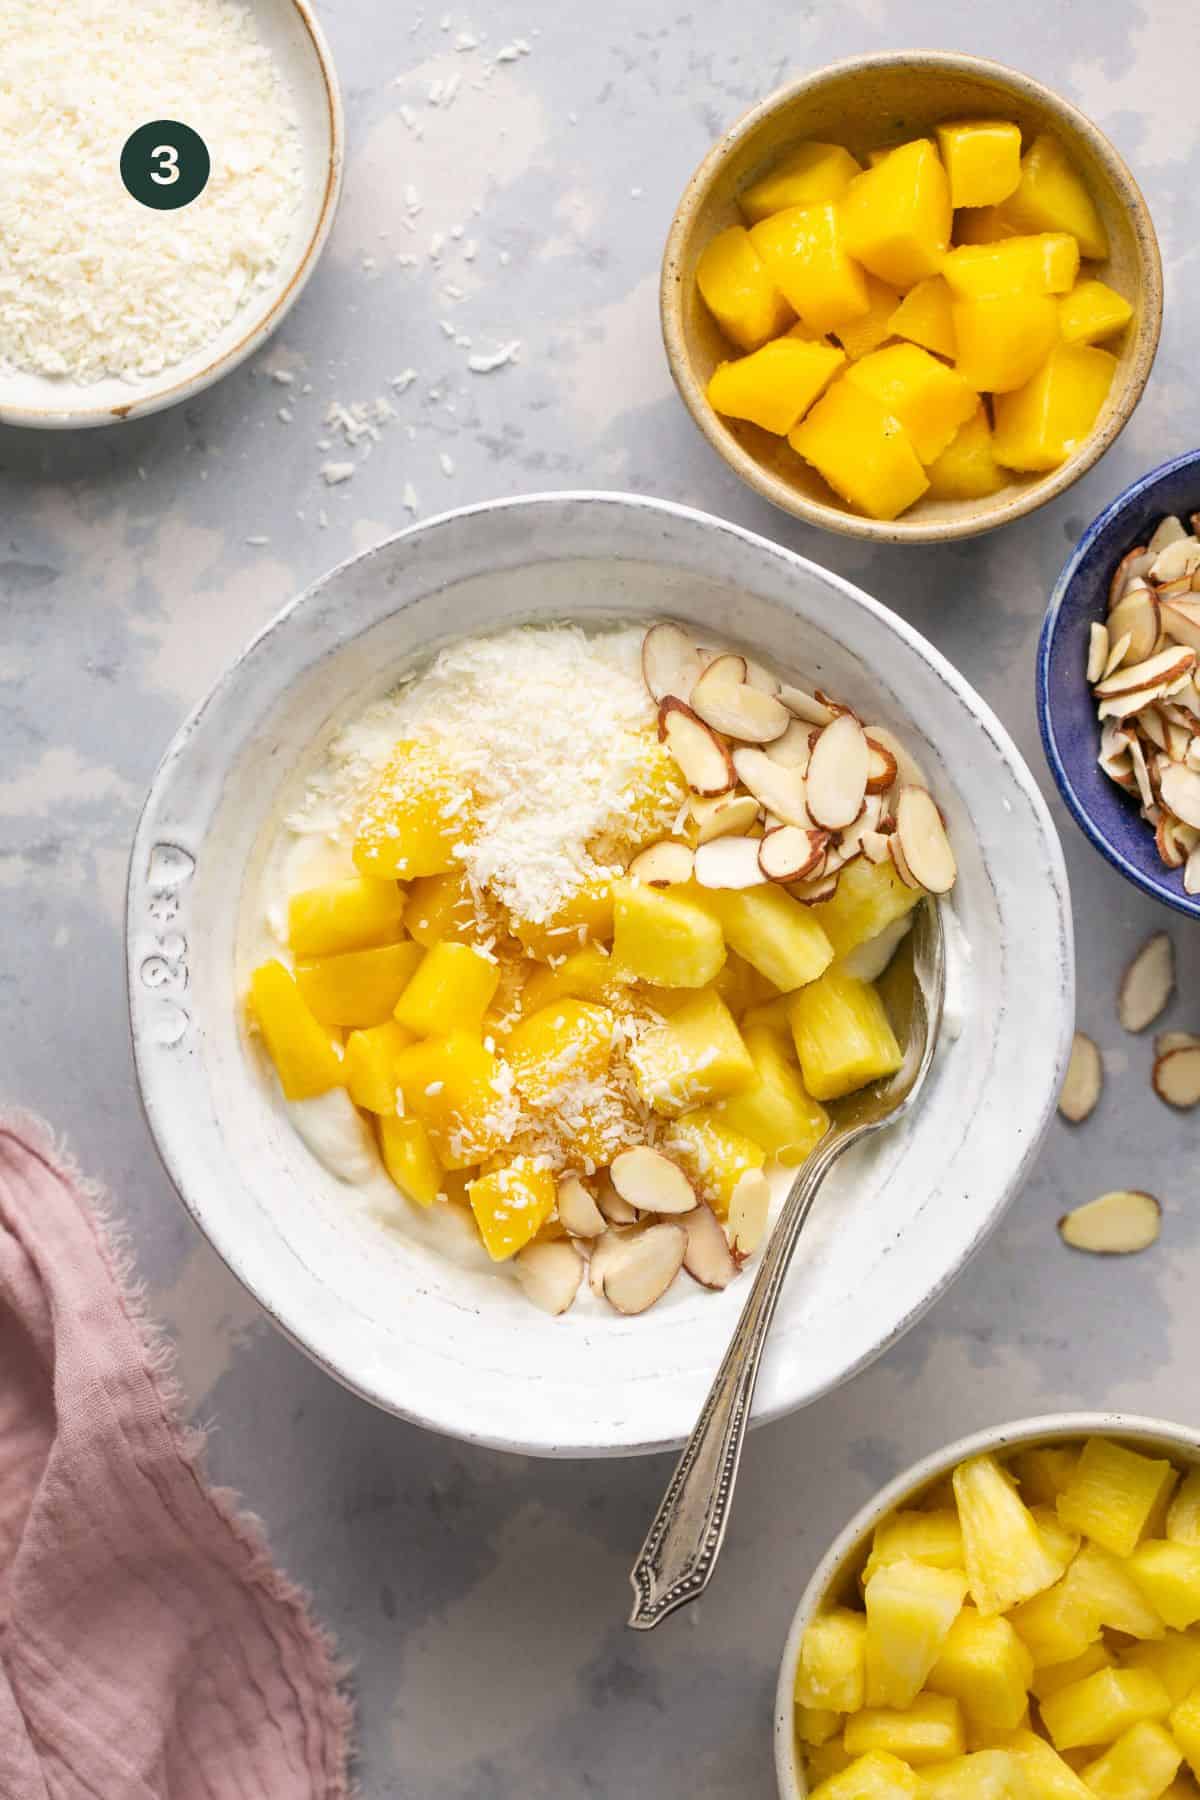 Pineapple, mango, sliced almonds and shredded coconut added on top of the yogurt bowl.